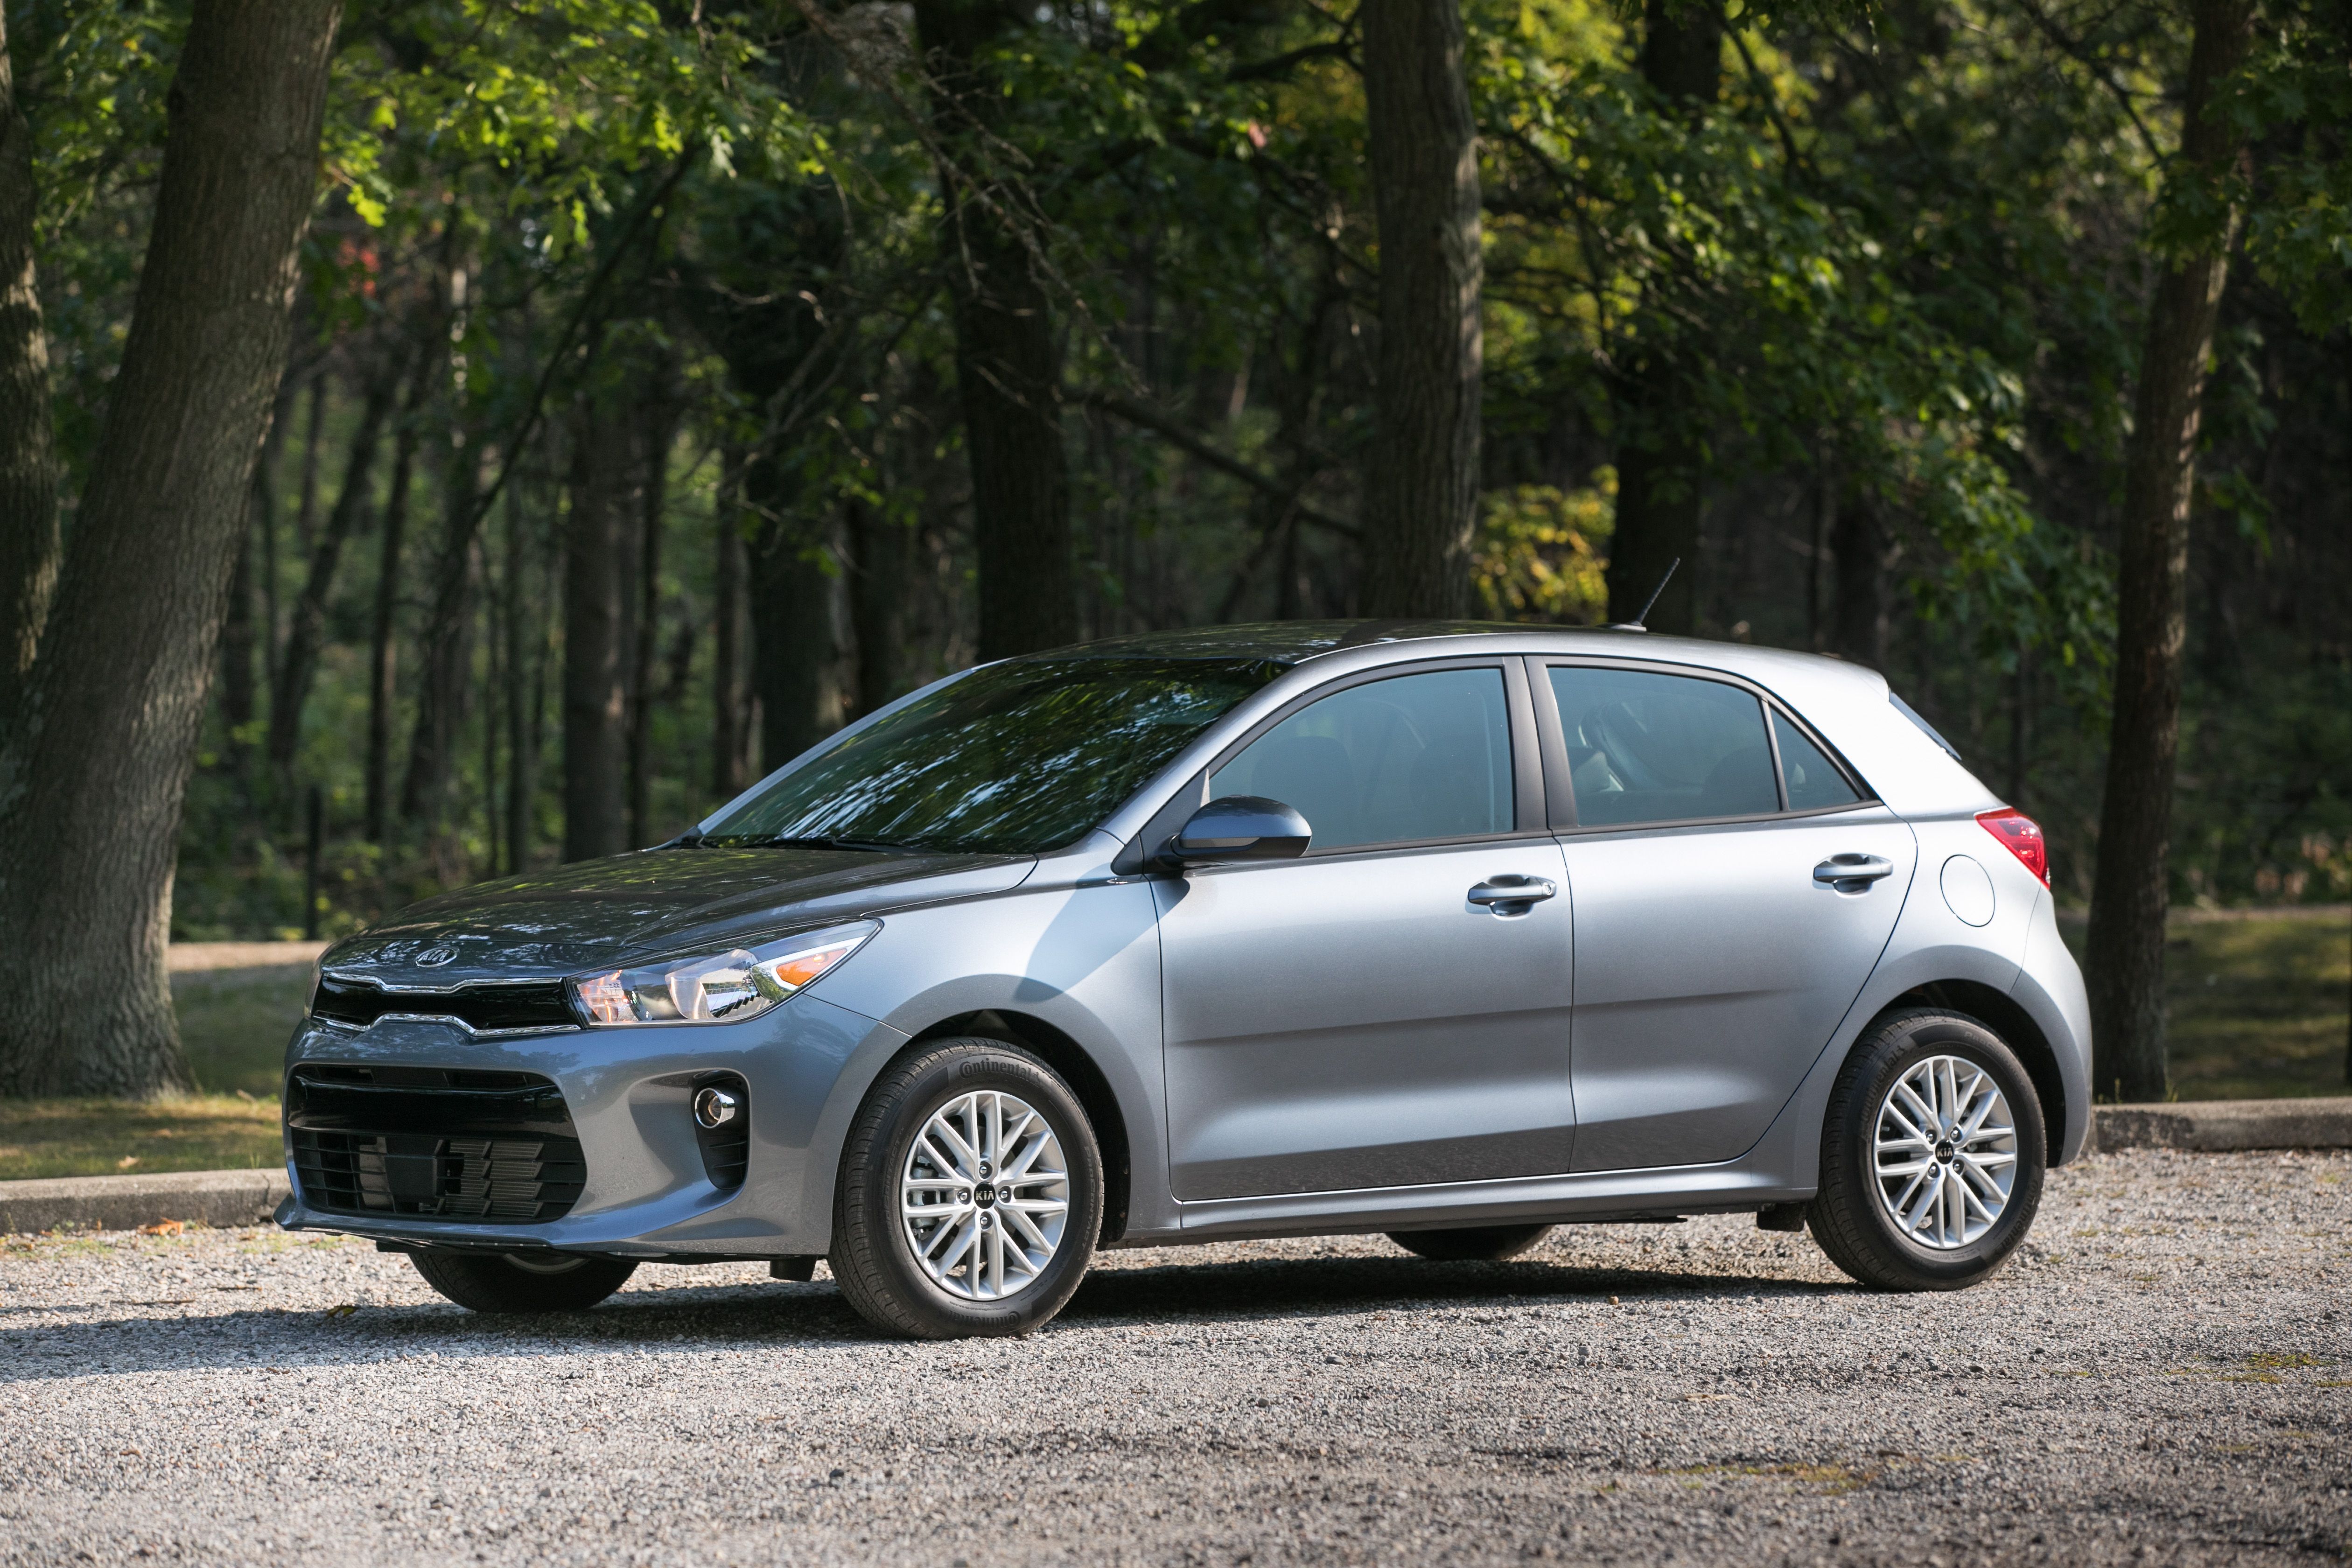 2019 Kia Rio Review, Pricing, and Specs